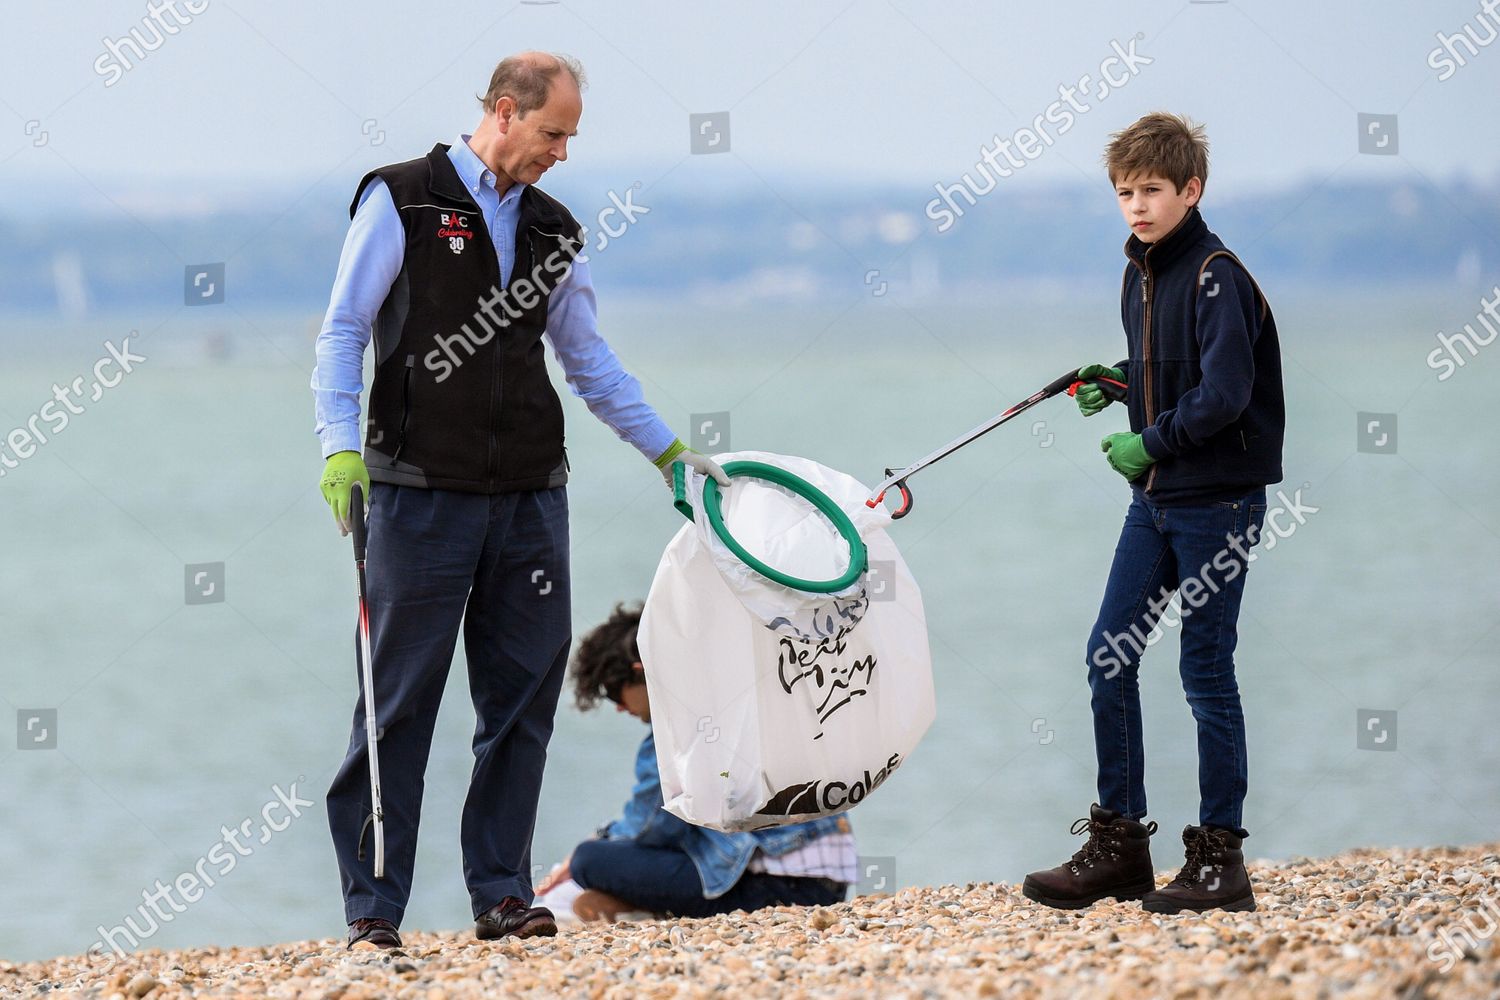 prince-edward-and-sophie-countess-of-wessex-great-british-beach-clean-southsea-beach-portsmouth-uk-shutterstock-editorial-10782998ca.jpg